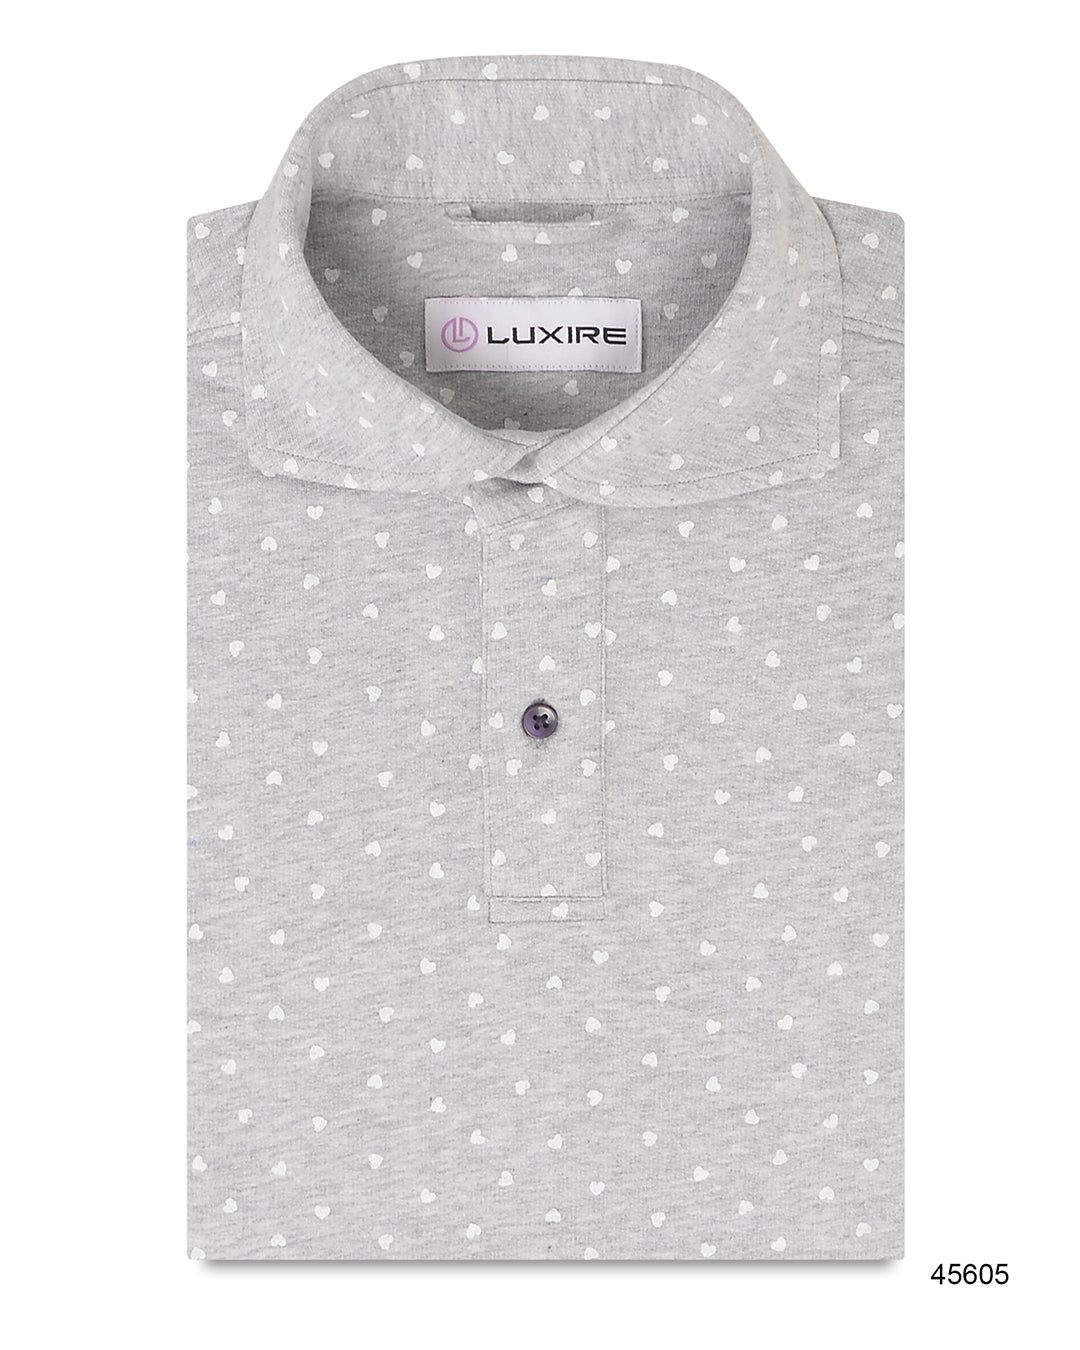 Front of the custom oxford polo shirt for men by Luxire in grey with white heart print